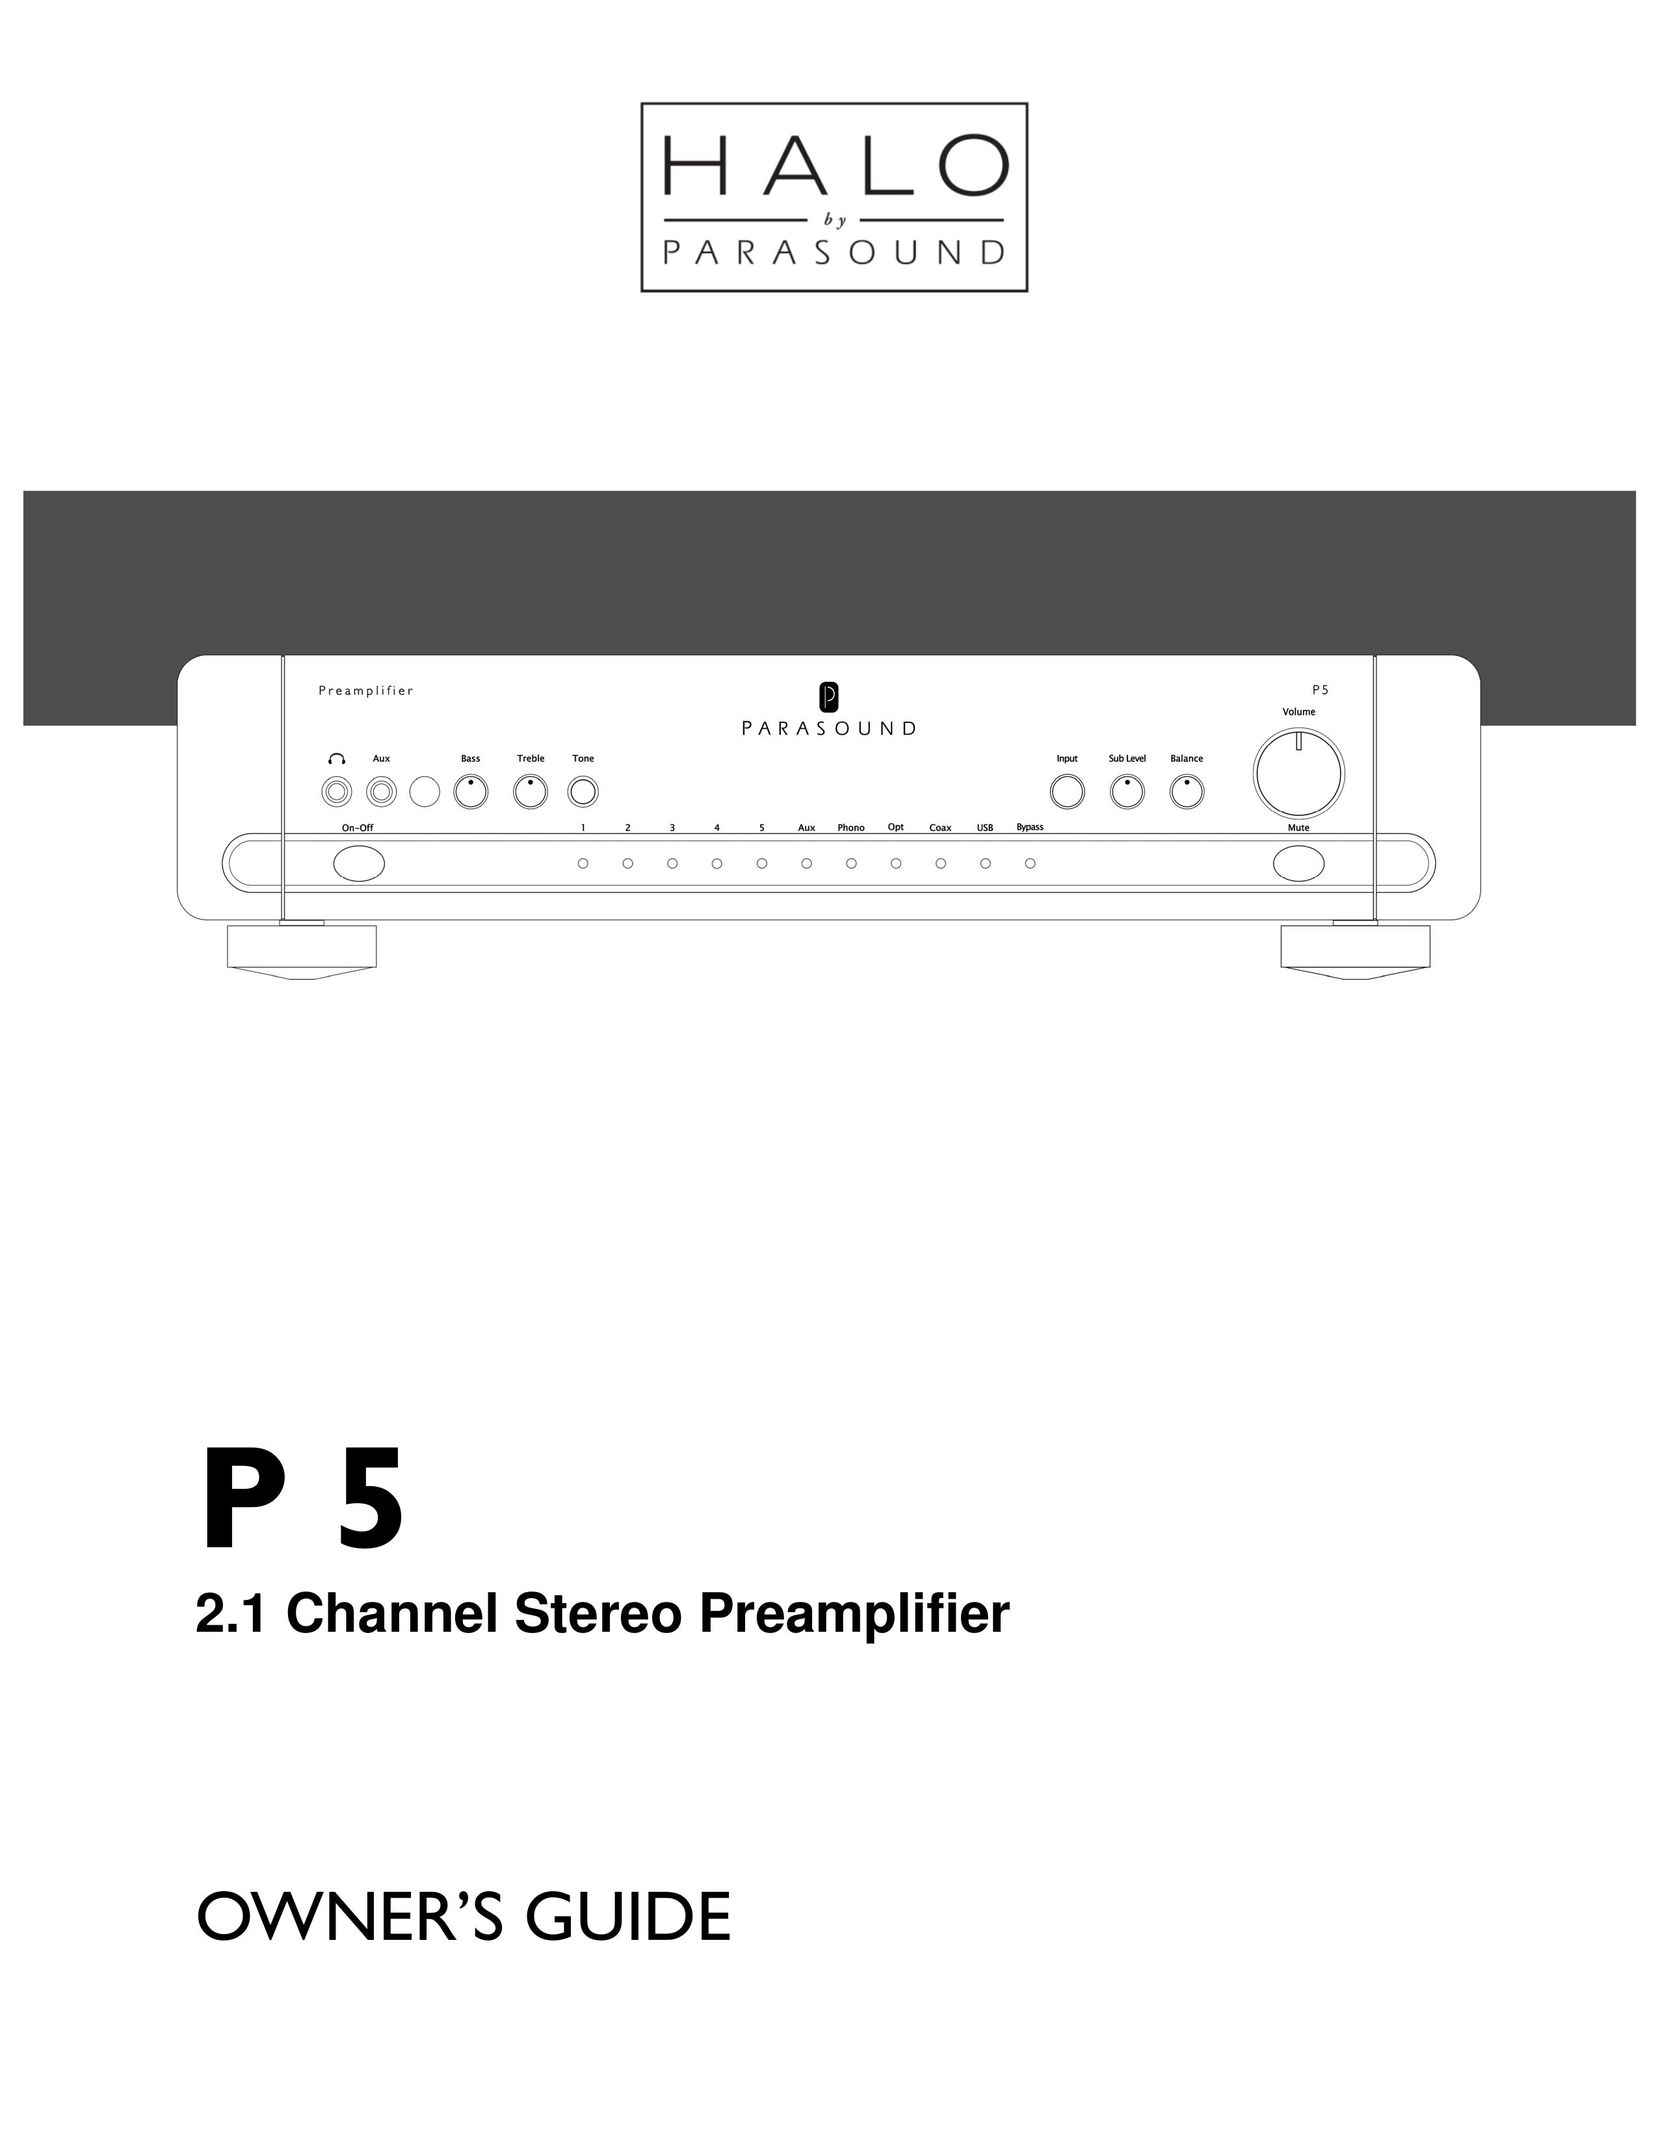 Parasound P 5 Home Theater System User Manual